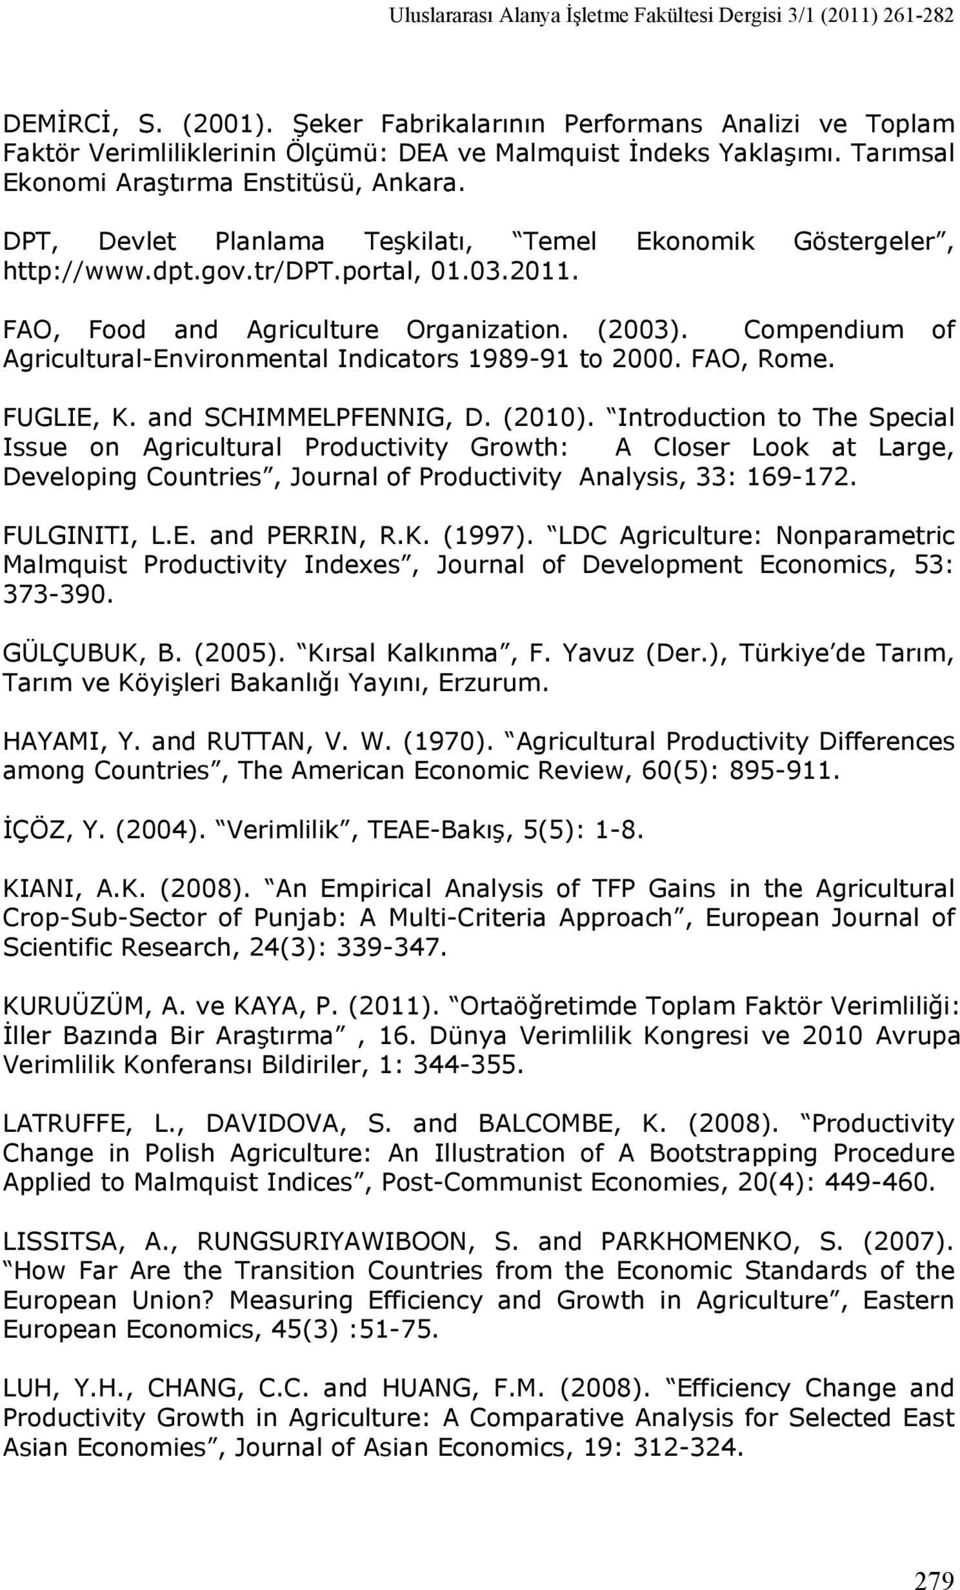 Compendium of Agricultural-Environmental Indicators 989-9 to 2000. FAO, Rome. FUGLIE, K. and SCHIMMELPFENNIG, D. (200).